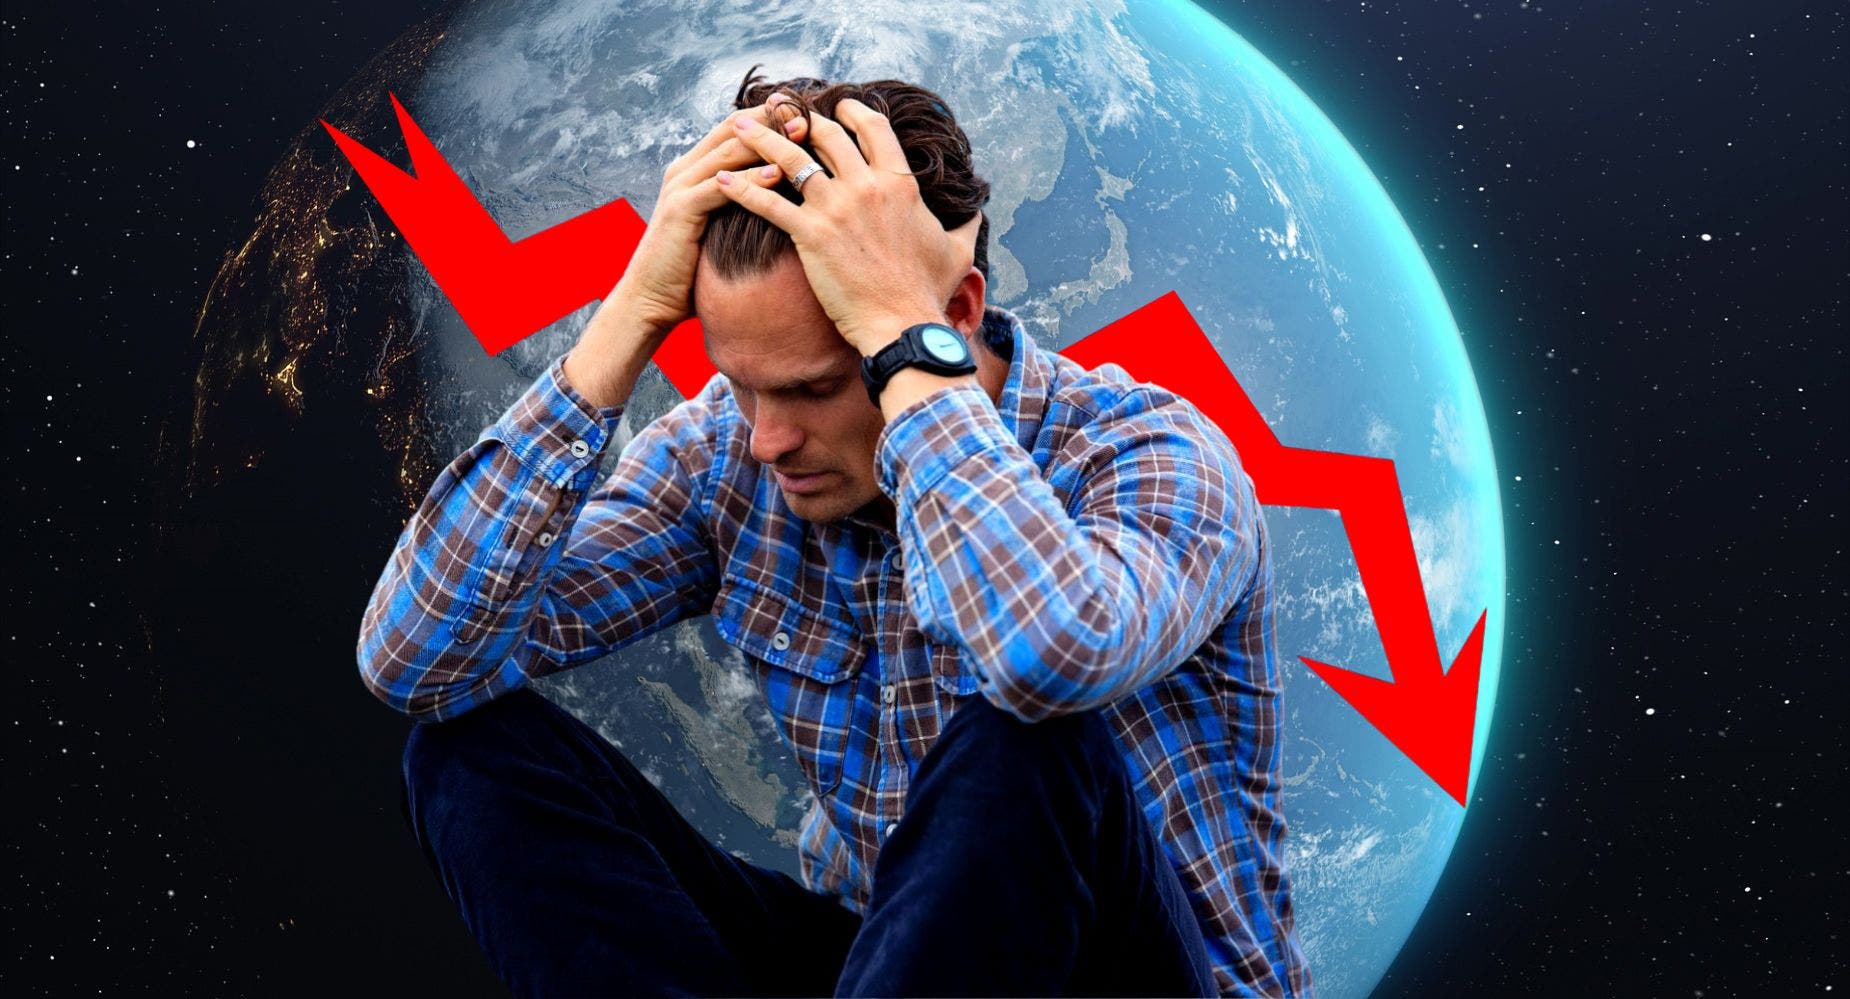 Global Recession Risk Rapidly Growing, With A Major Economy On The Brink, Wall Street Economist Says